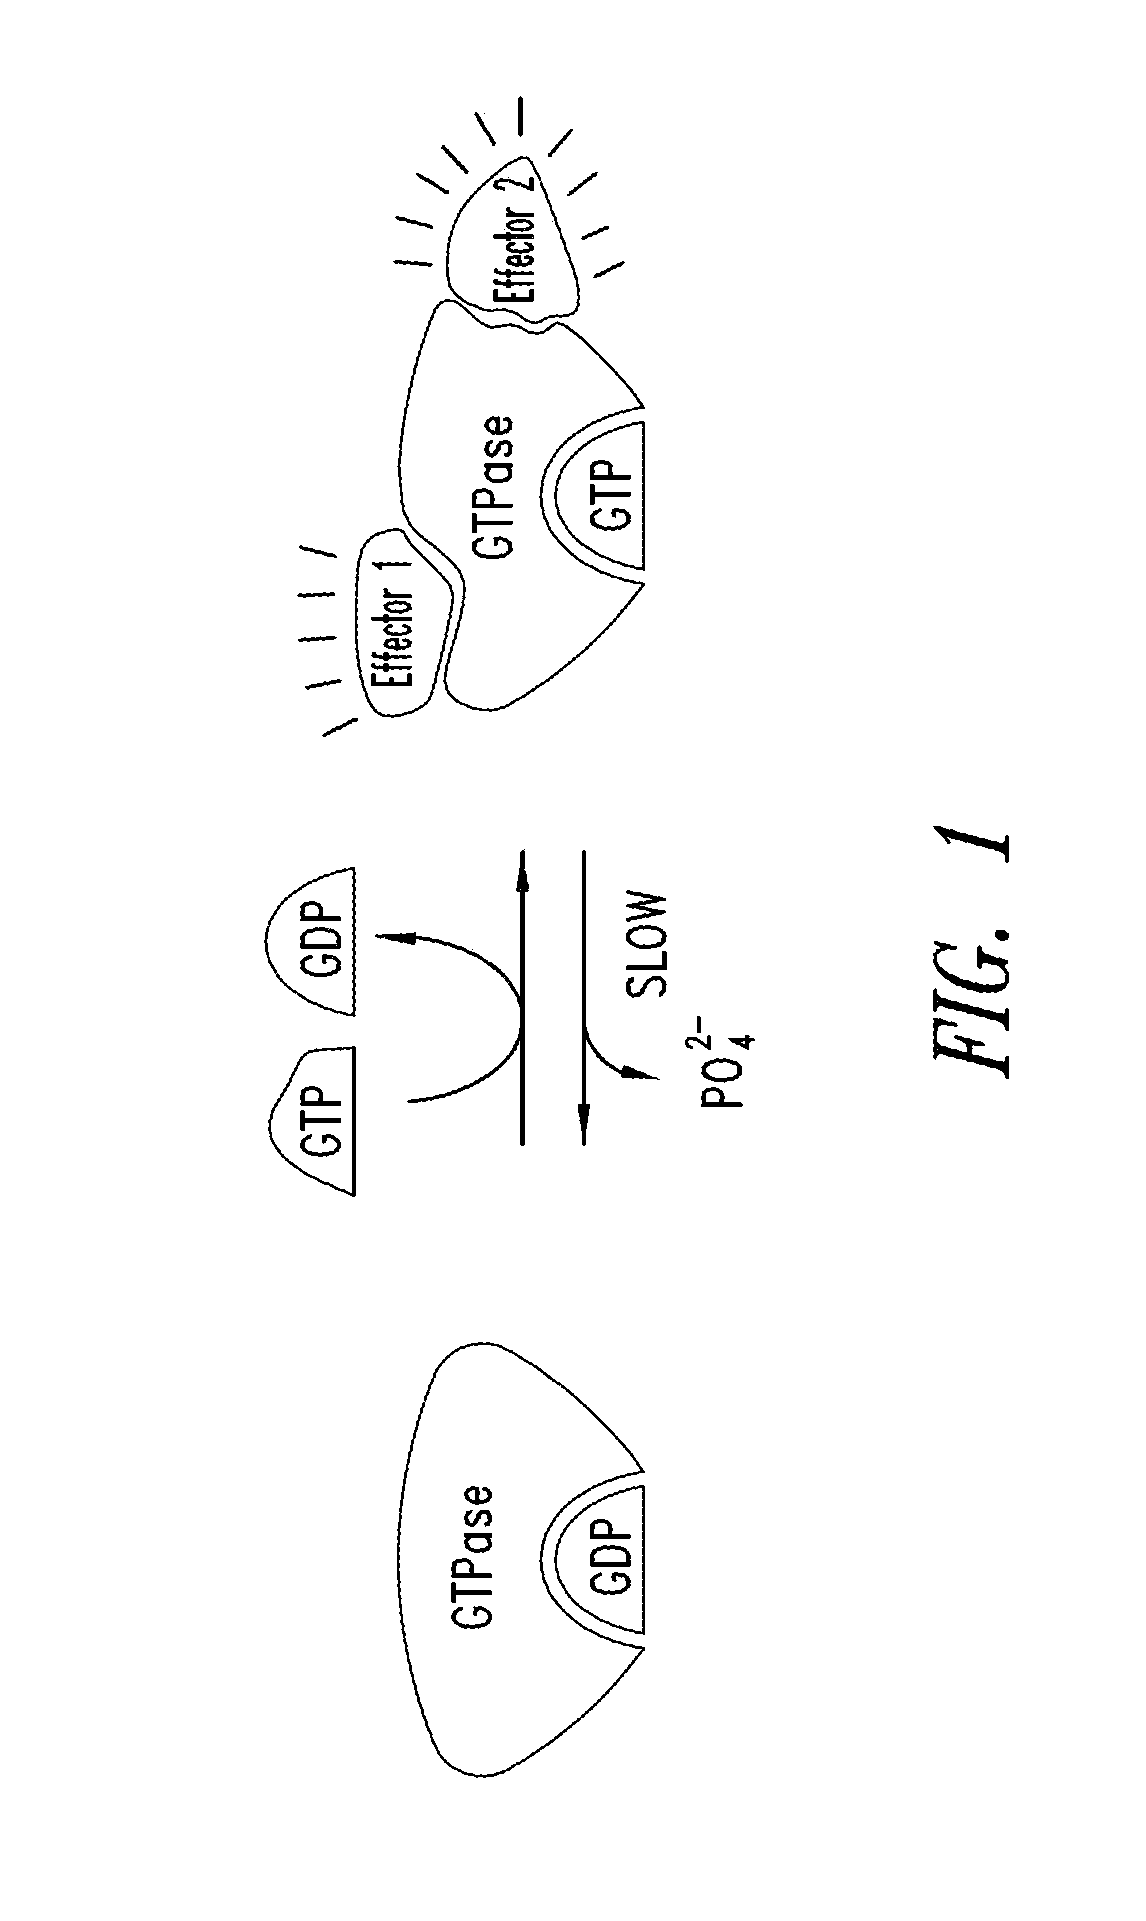 Fused-tricyclic inhibitors of kras and methods of use thereof